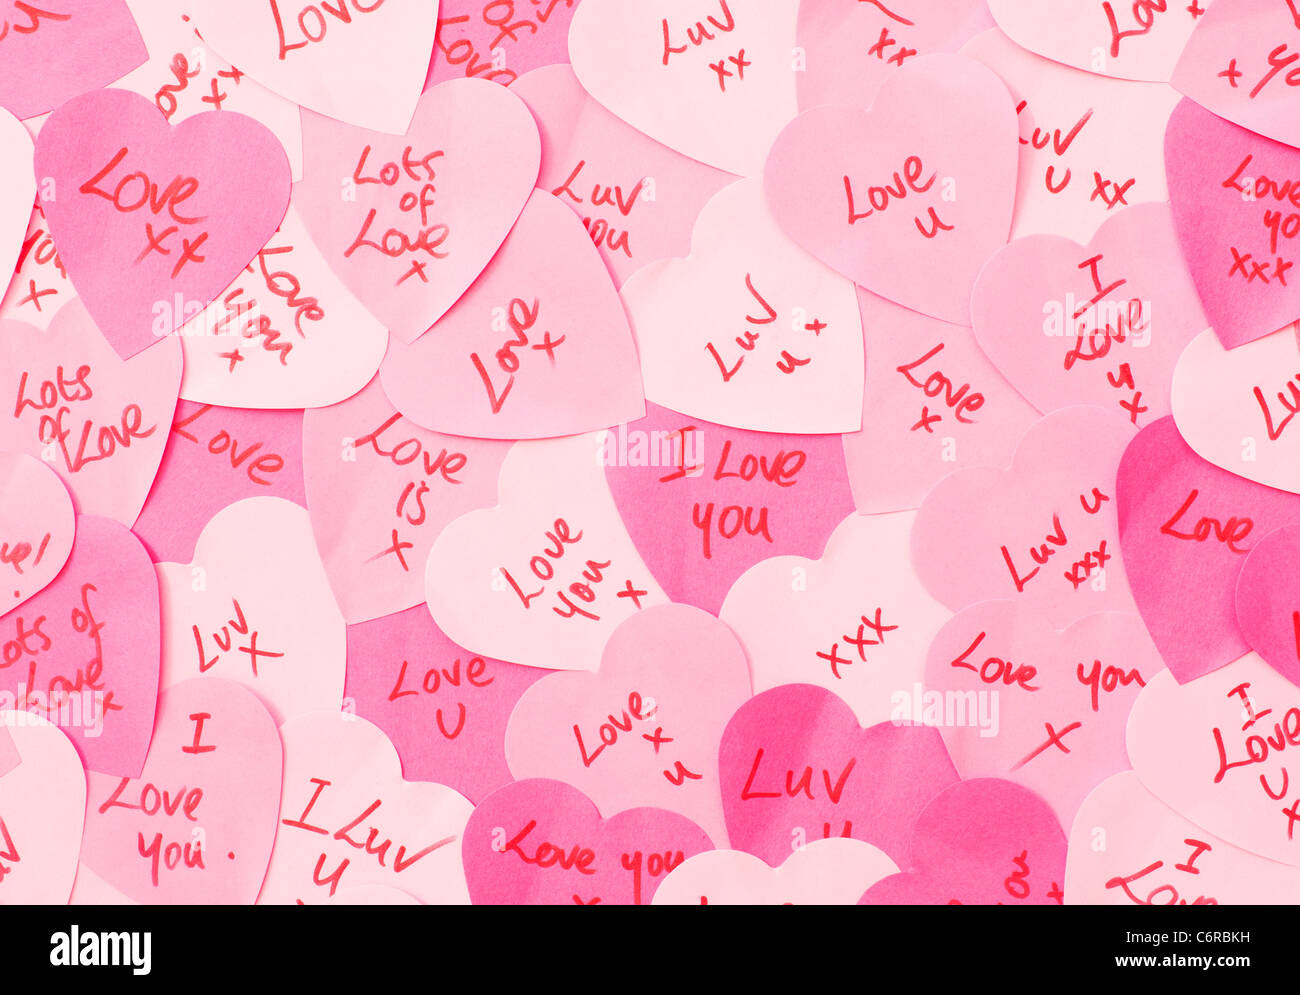 Messages of Love written on pink heart shaped Post-it note paper Stock Photo